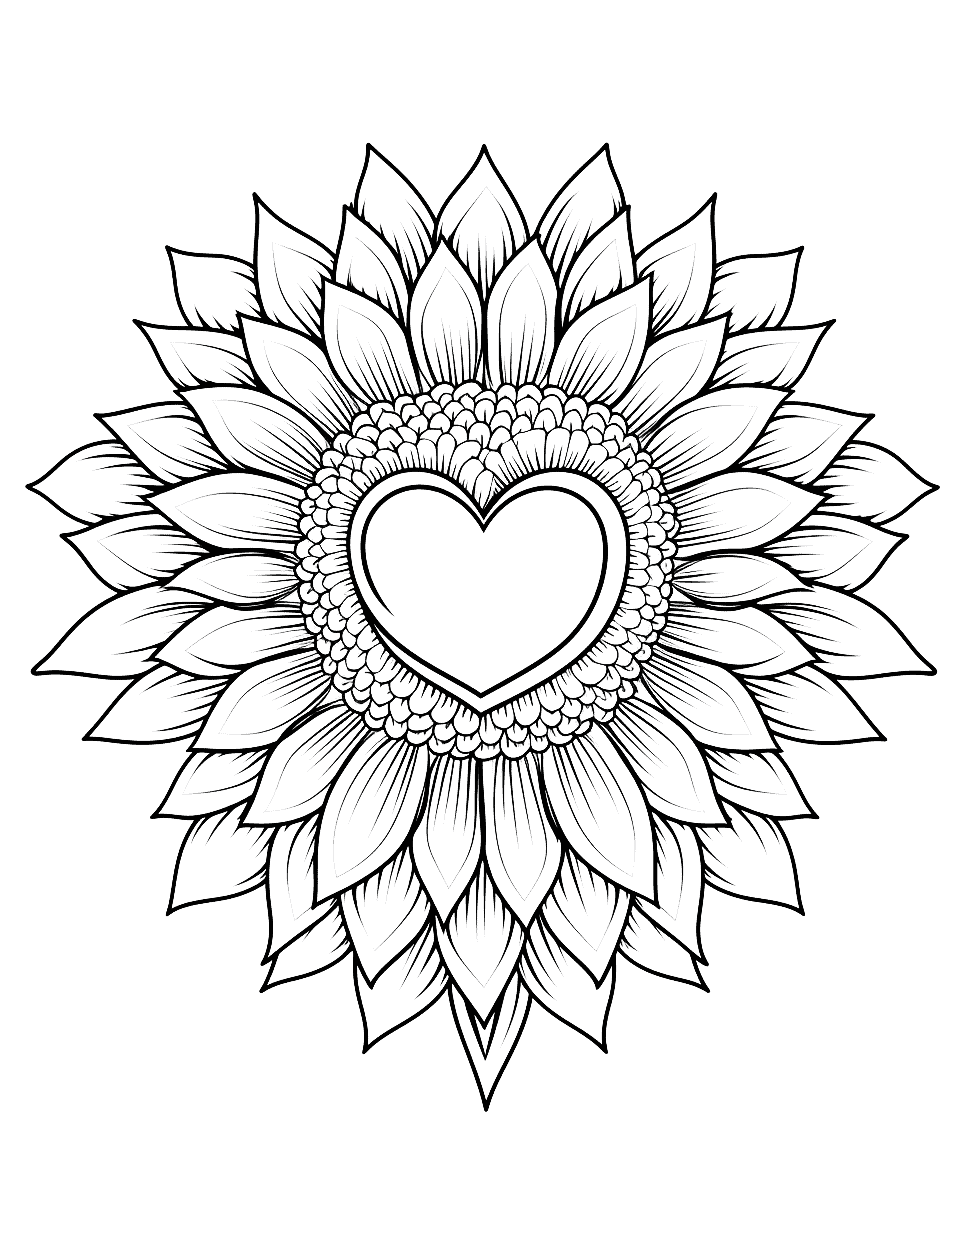 Heart Sunflower Coloring Page - A sunflower with a heart-shaped center.